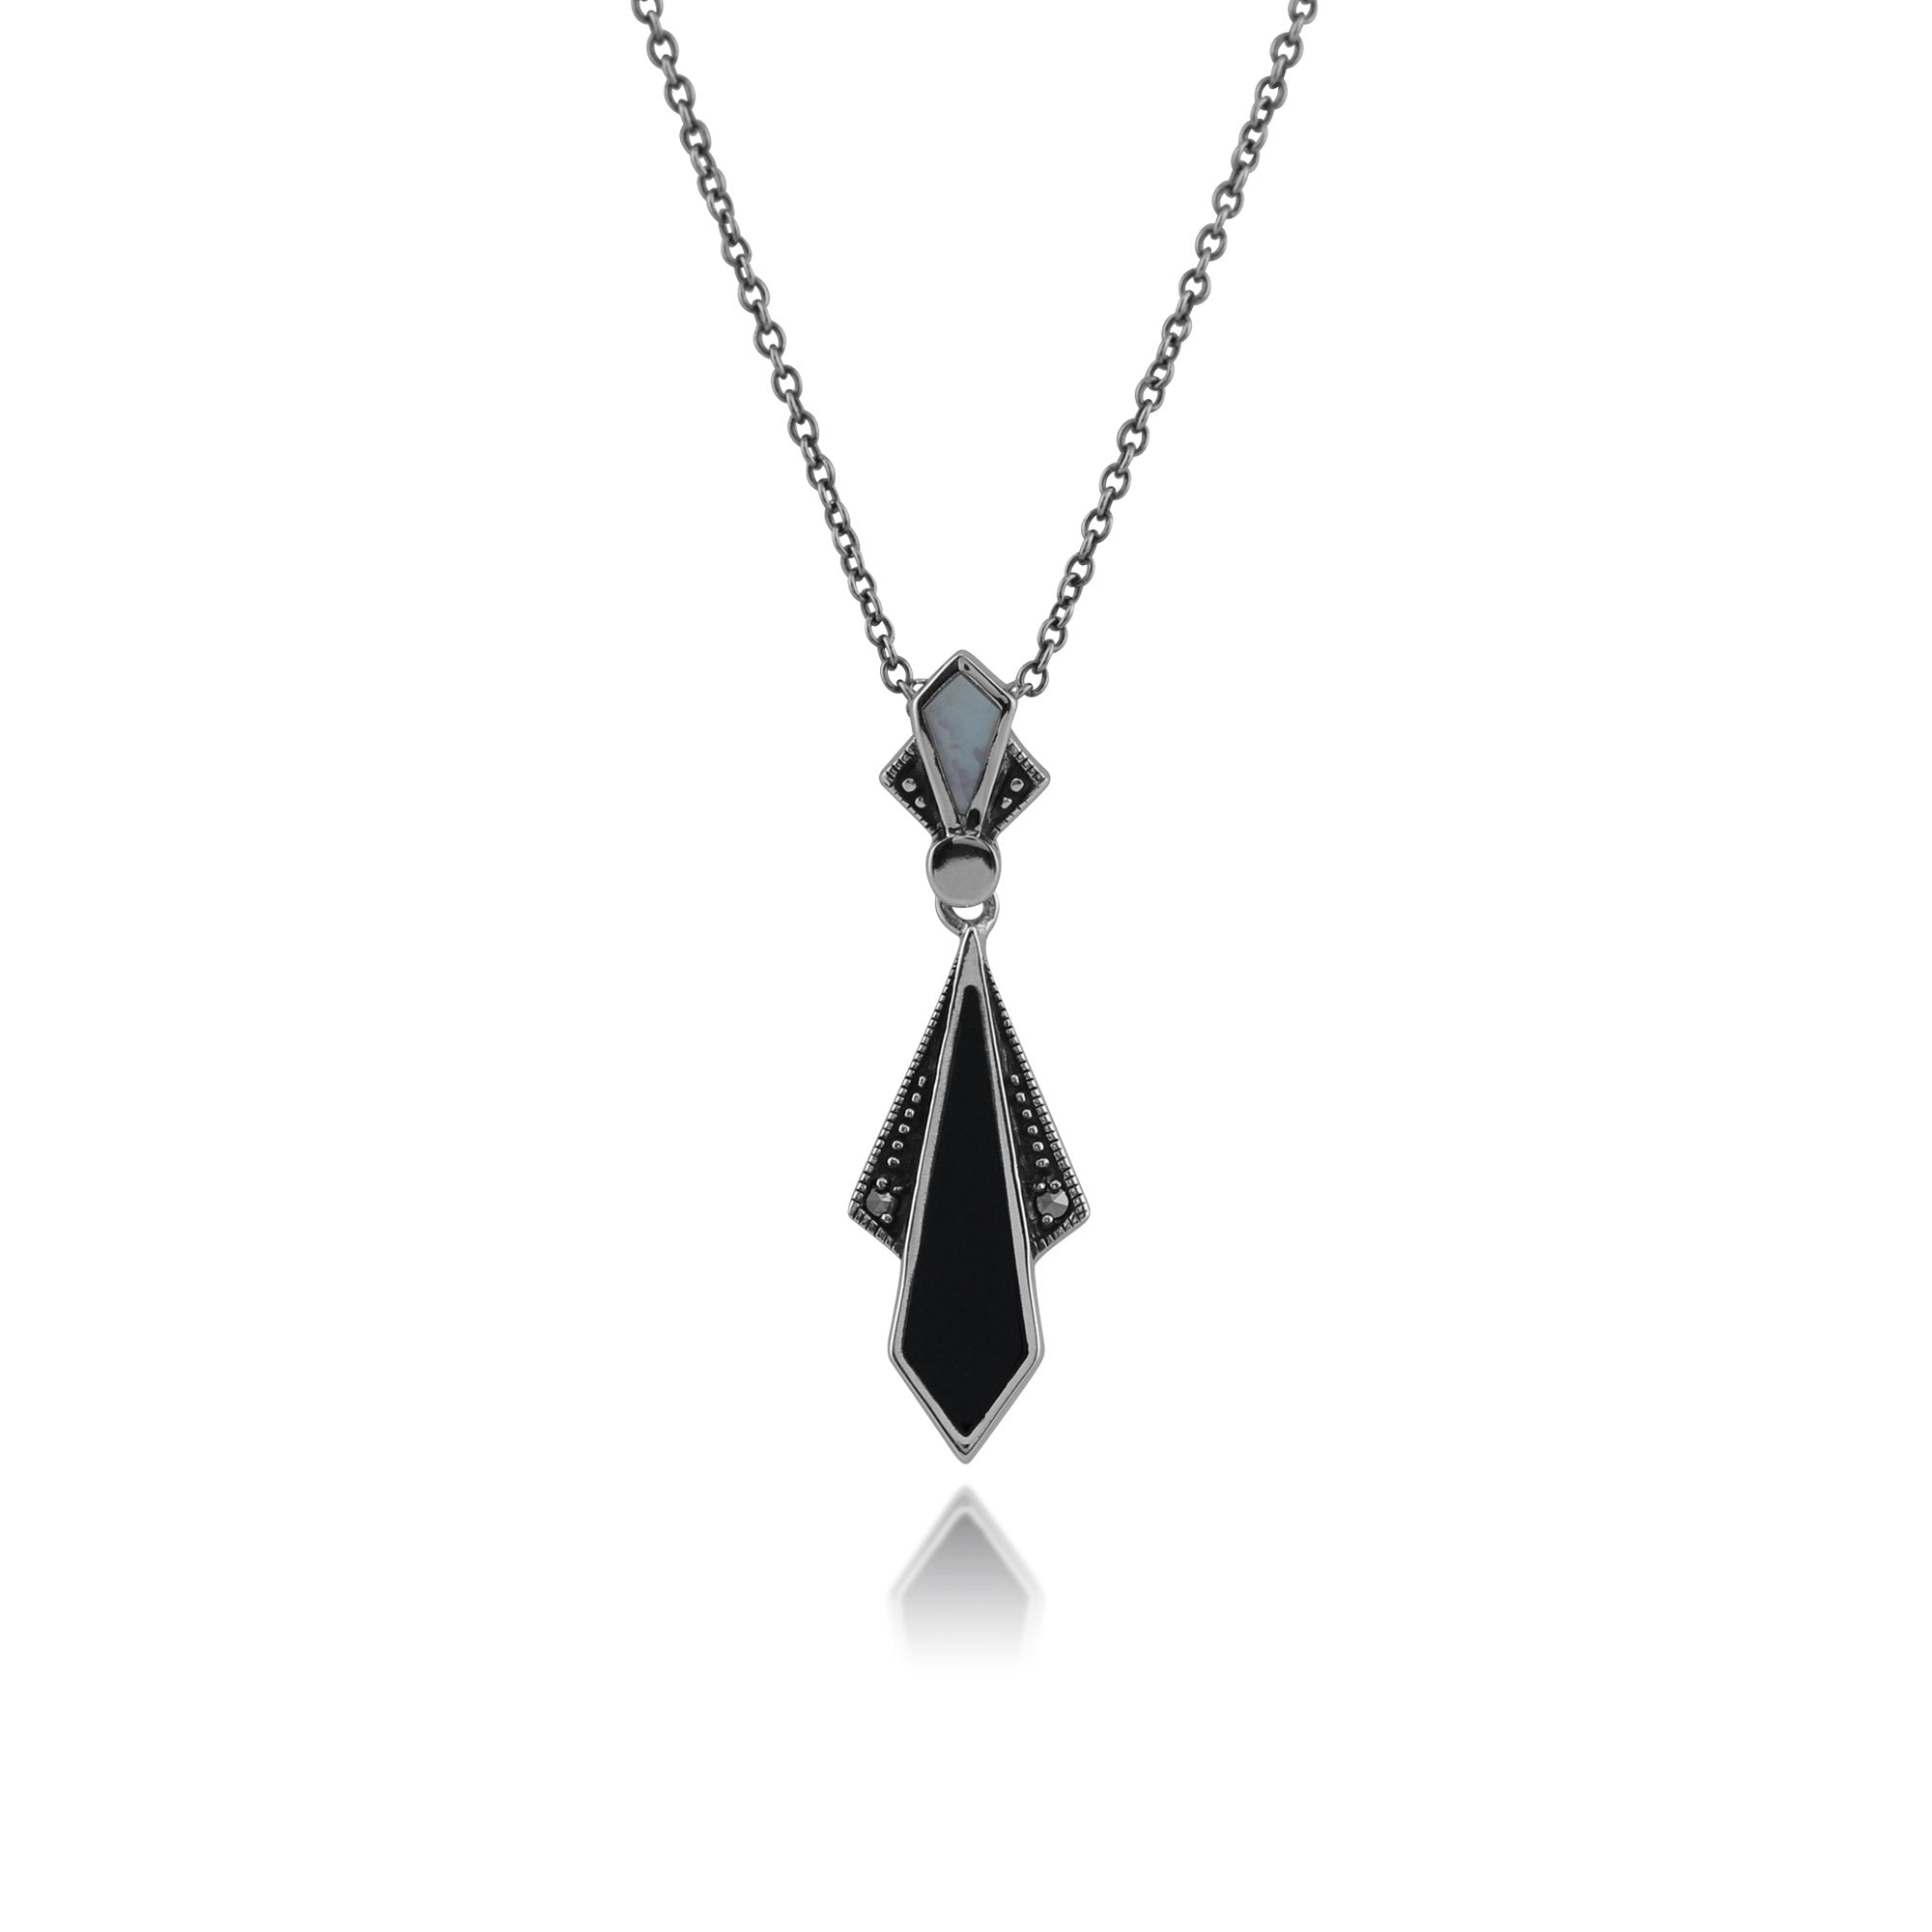 Art Deco Style Diamond Black Onyx, Mother of Pearl & Marcasite Necklace In Sterling Silver